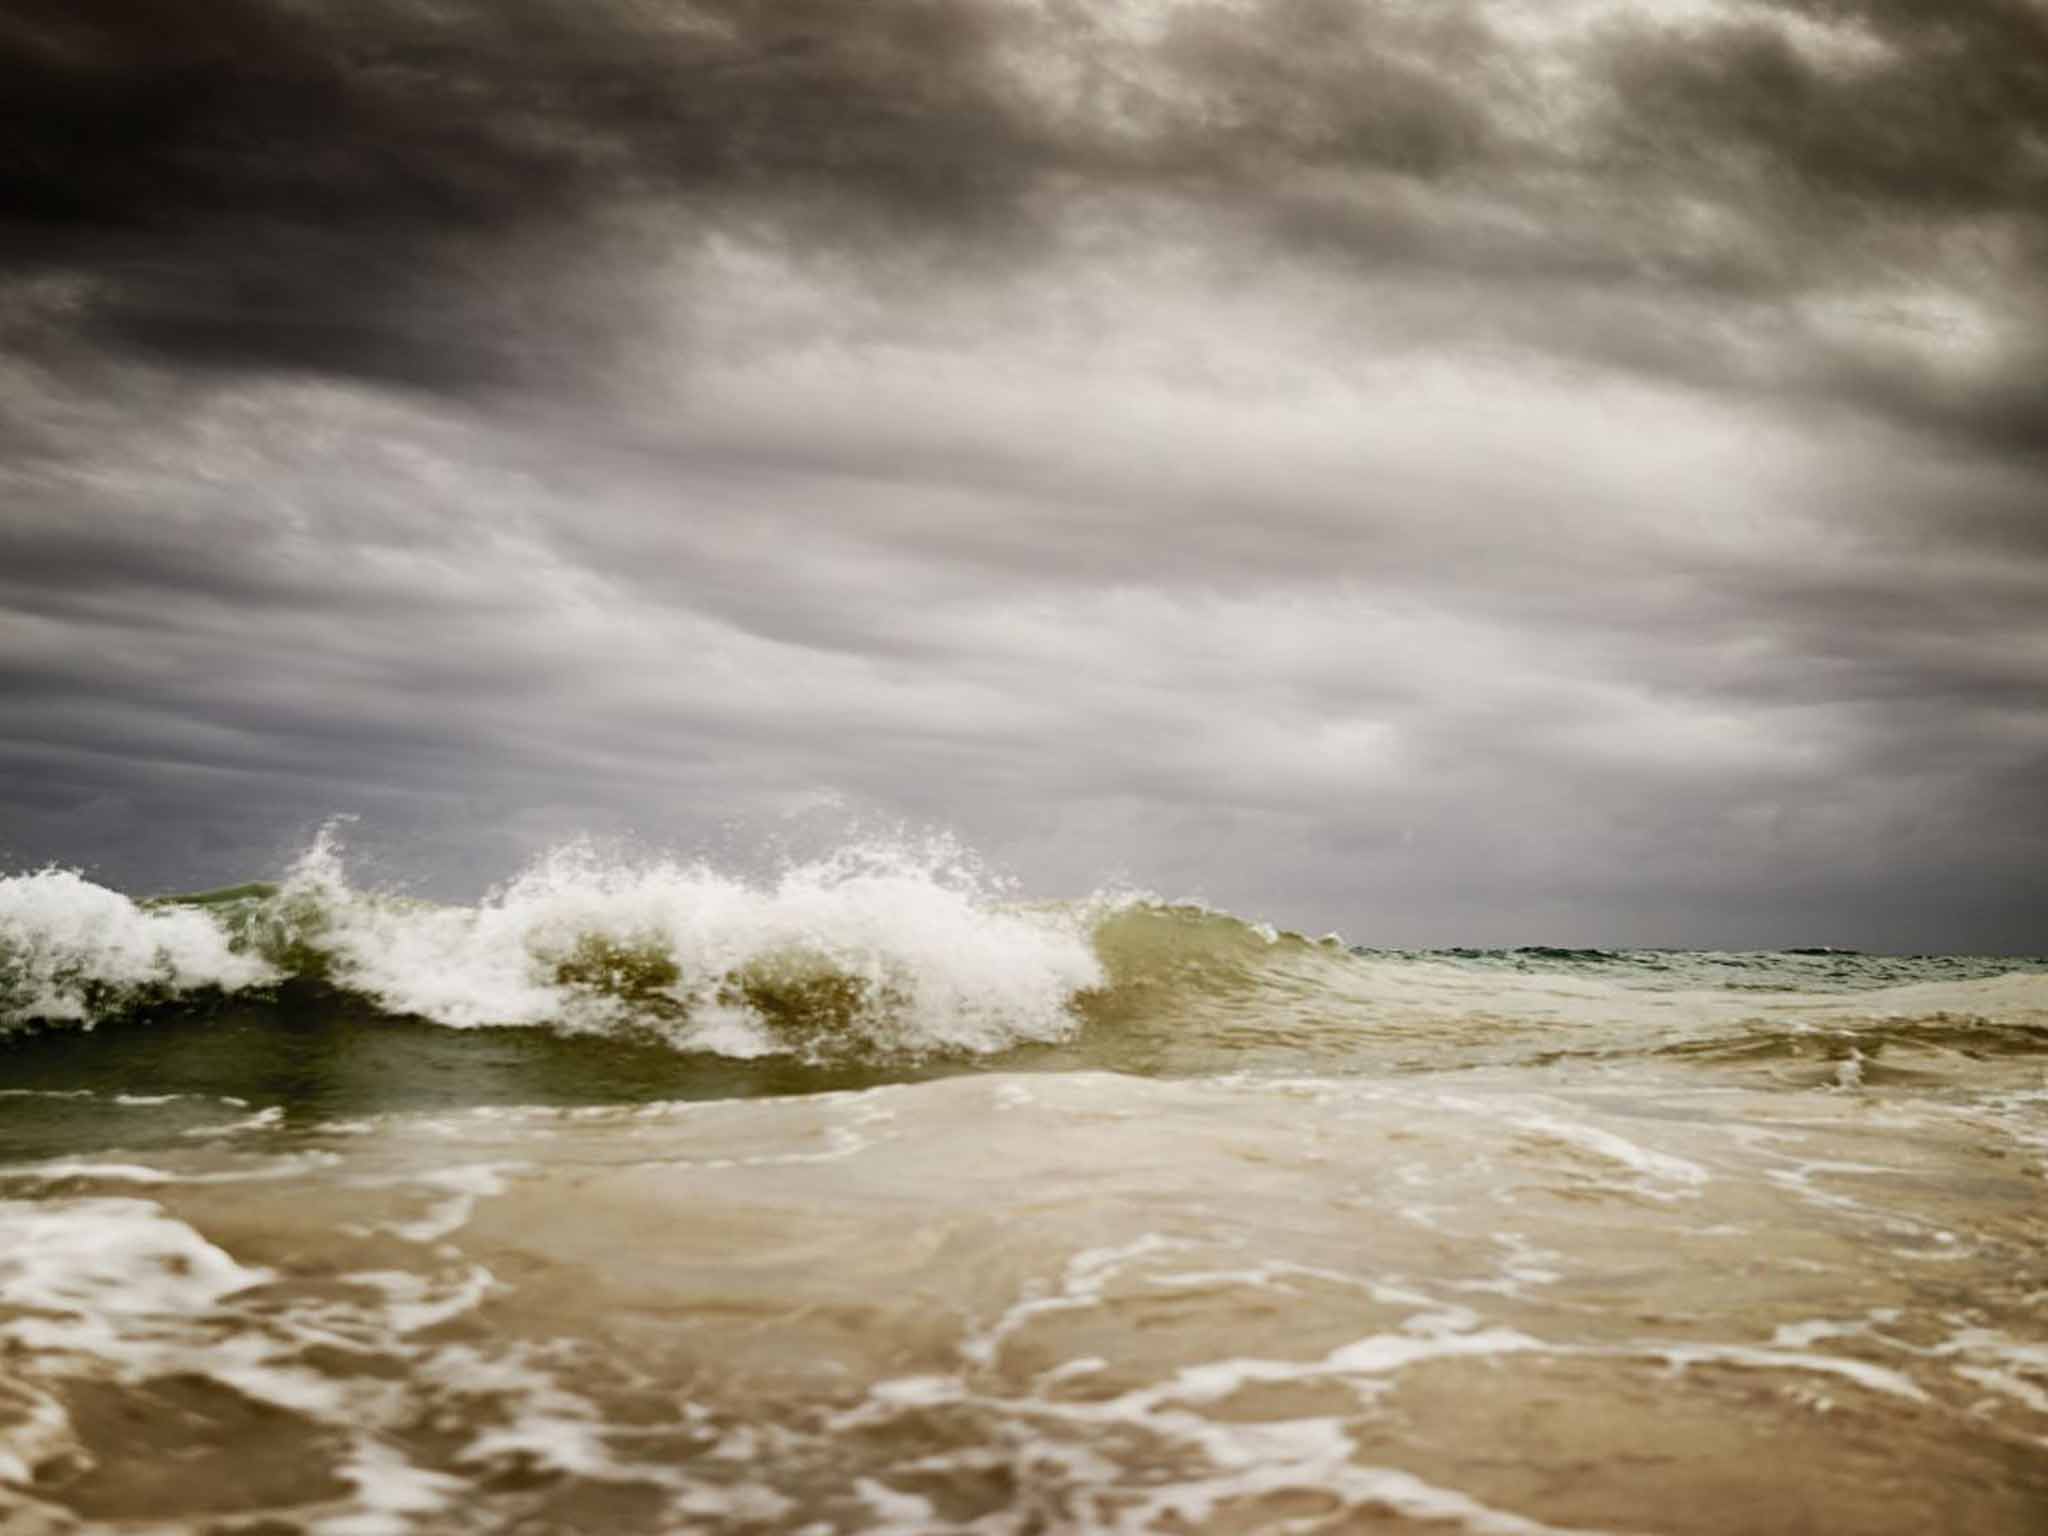 Strife on the ocean waves: a storm rages